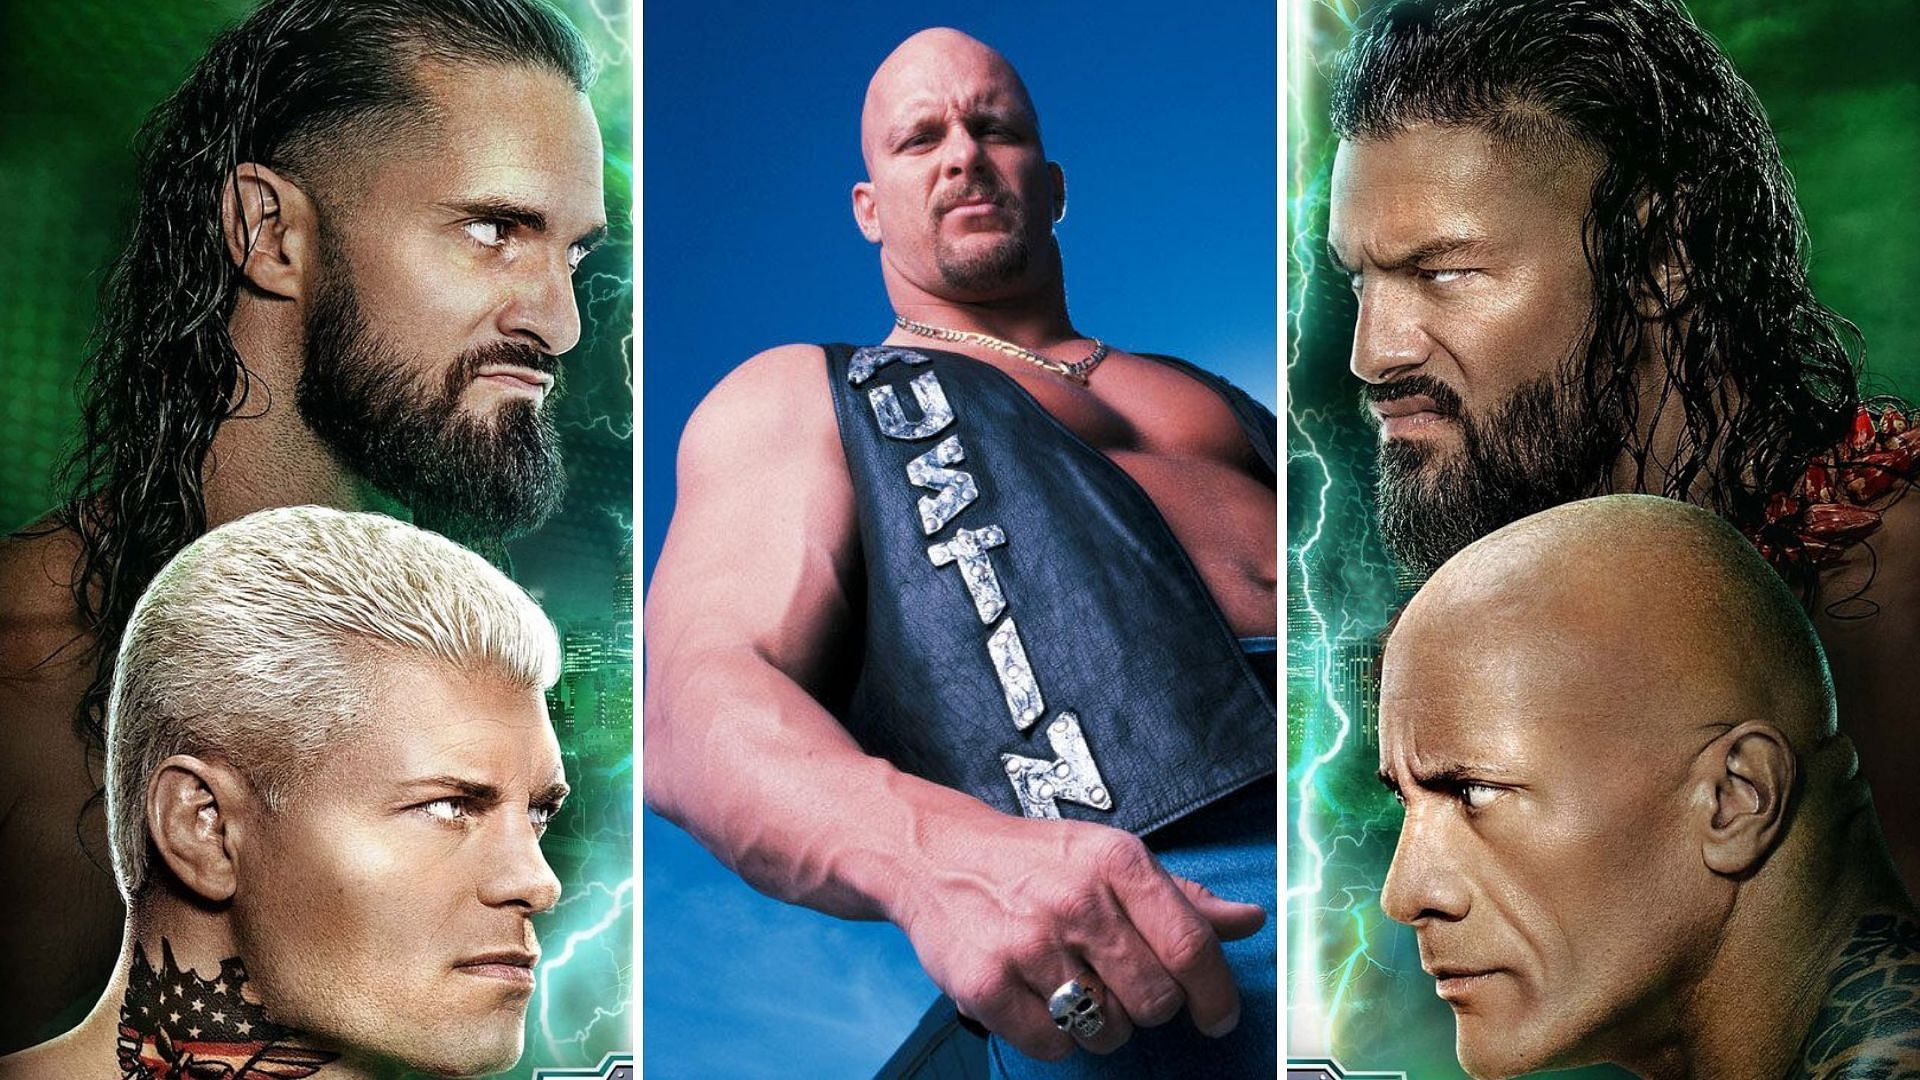 Stone Cold is rumored to have a role to play at WrestleMania 